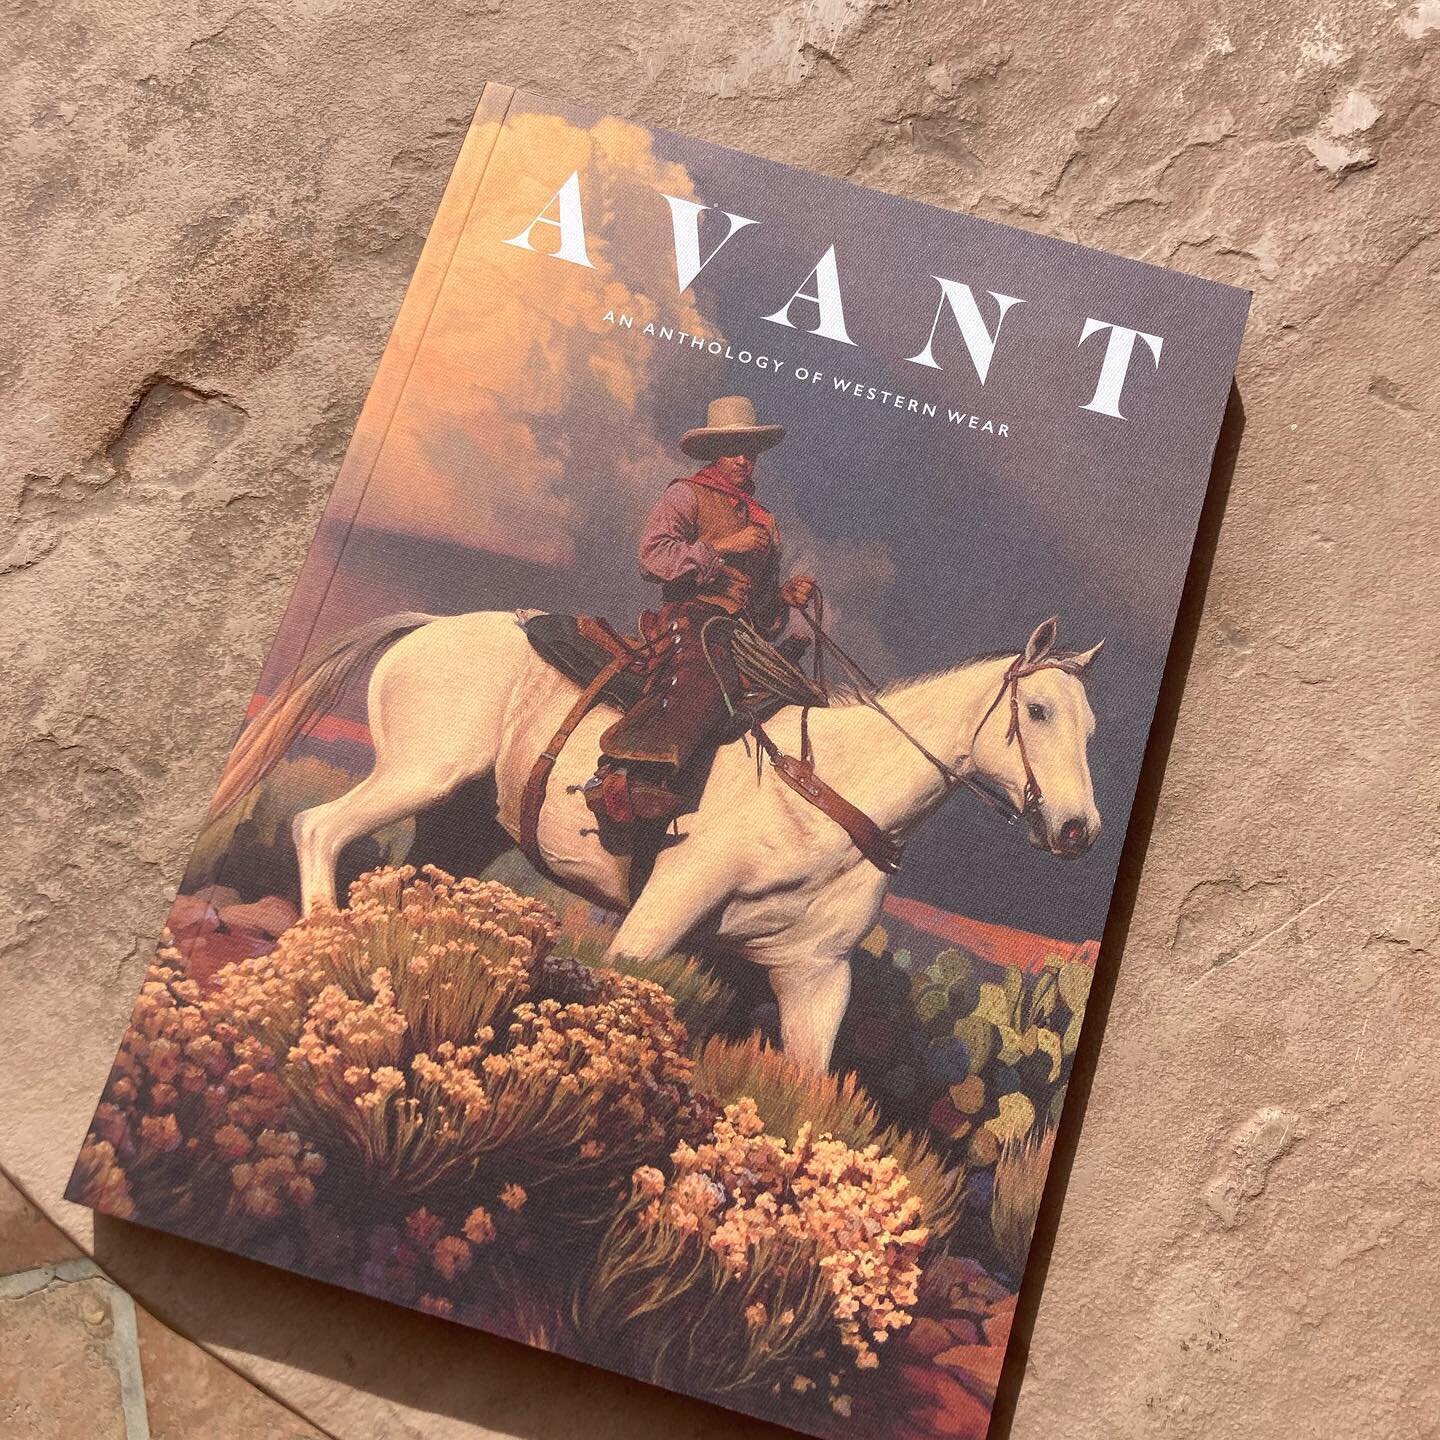 Back in stock !!
Avant 5, An Anthology of Western Wear, is available on our website !
Link in bio !! Don&rsquo;t miss it !
#magazine #avant #western #westernwear #cowboys #art #markmaggiori #theavantmag #book #america #west